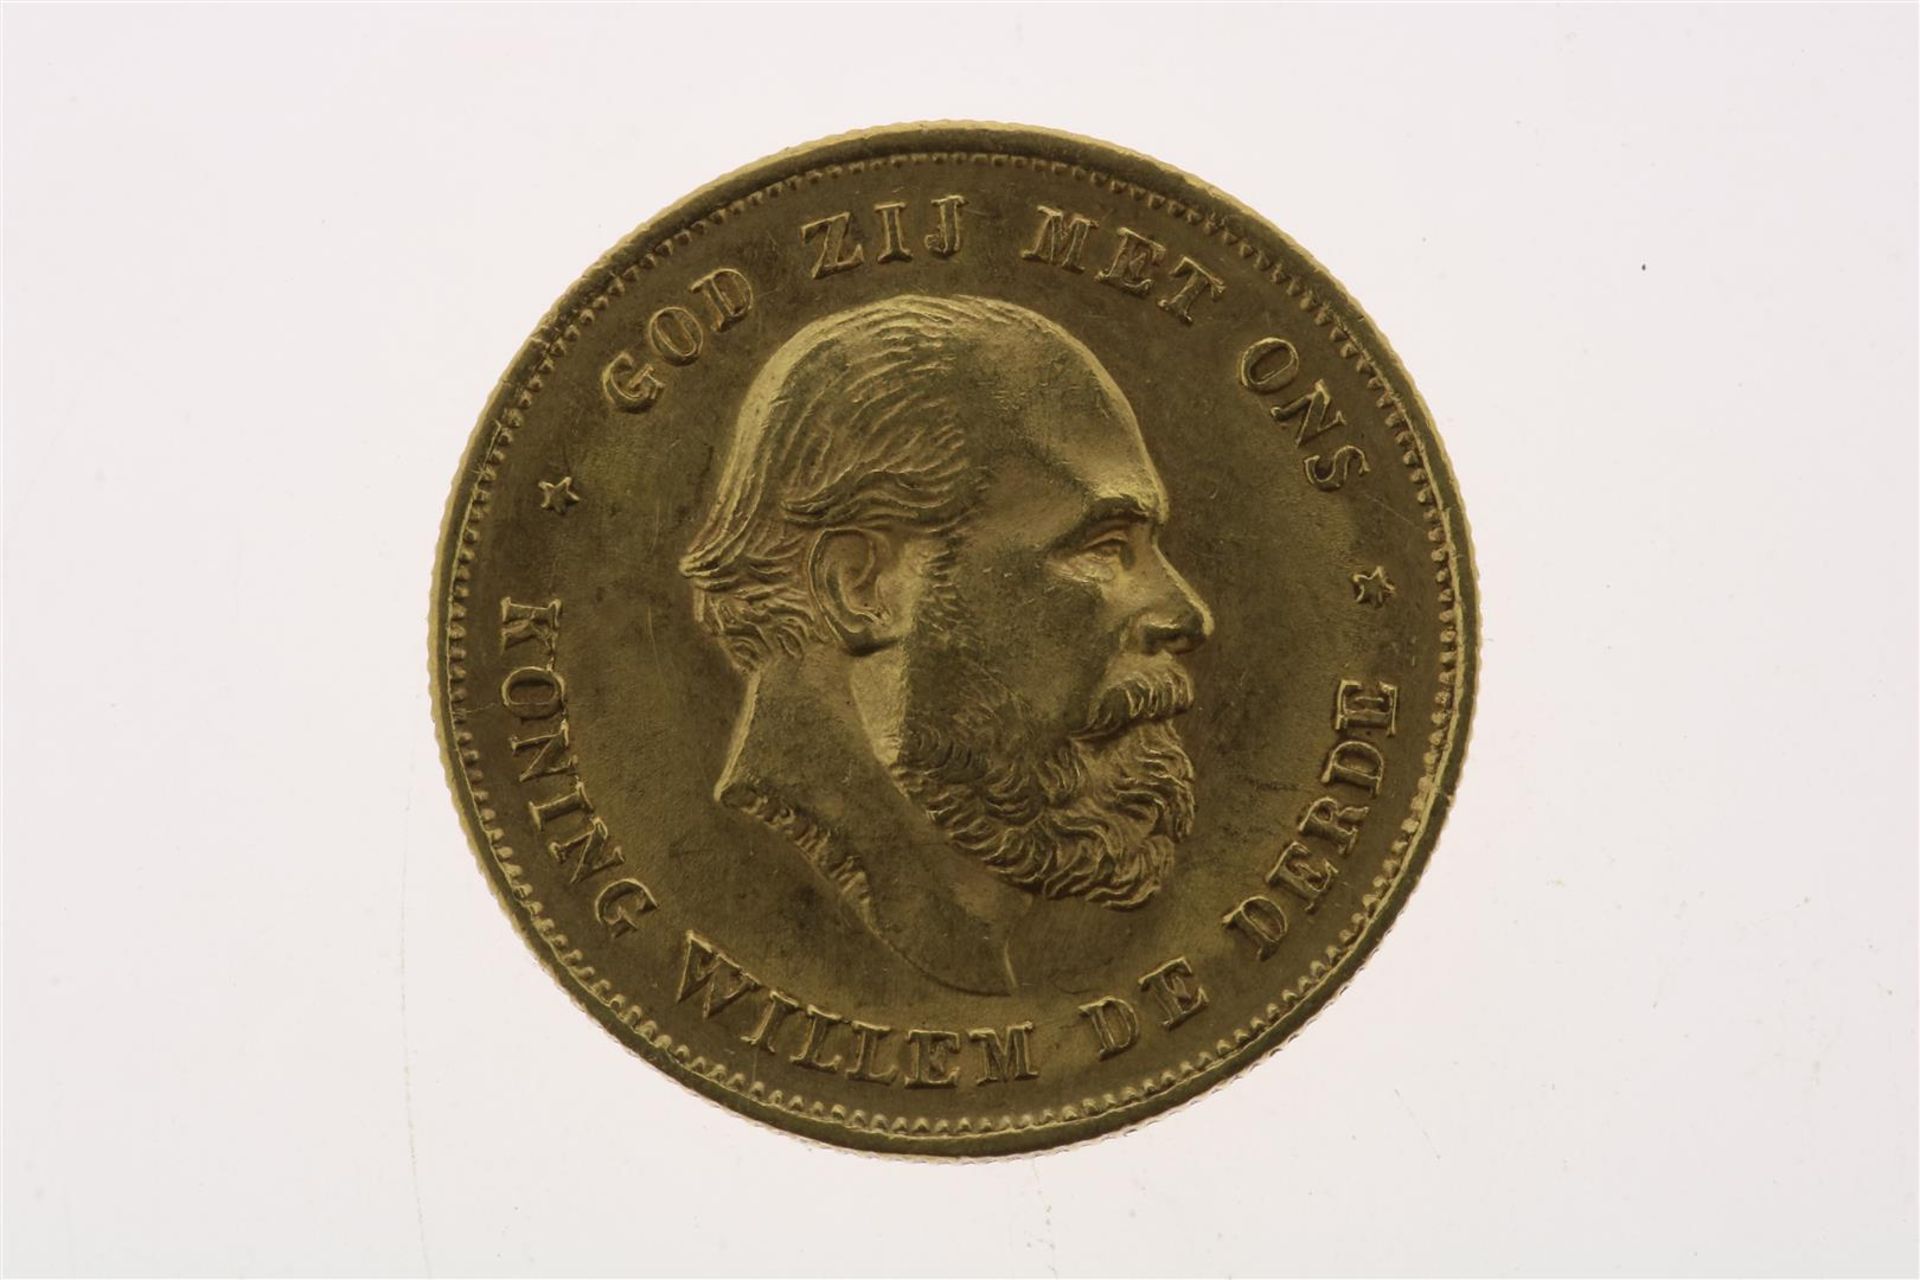 Gold tenner with image of Willem III, looking to the right, 1875, weight 6.72 grams.